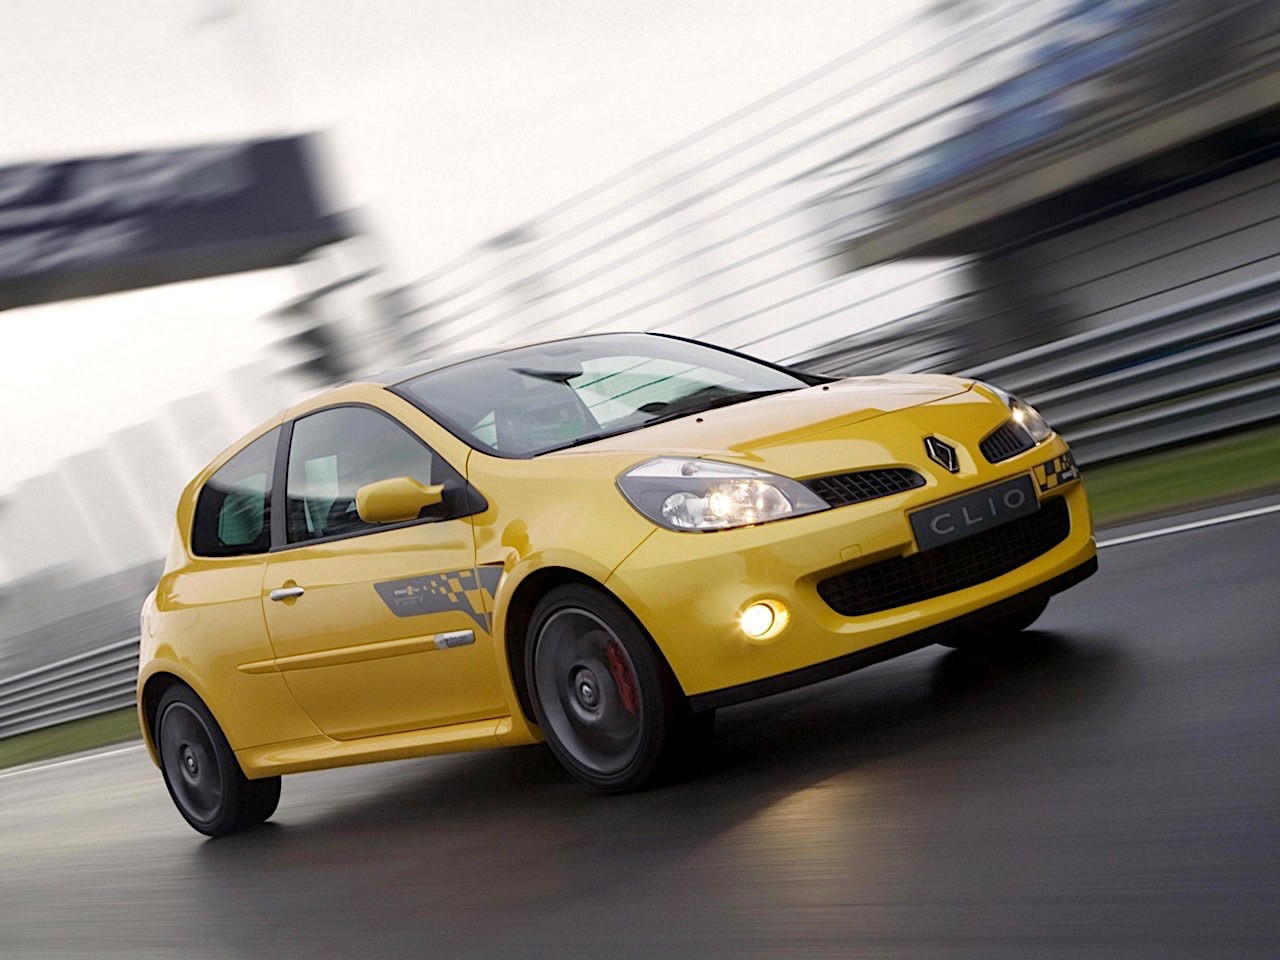 Renault Clio RS 2009 Yellow